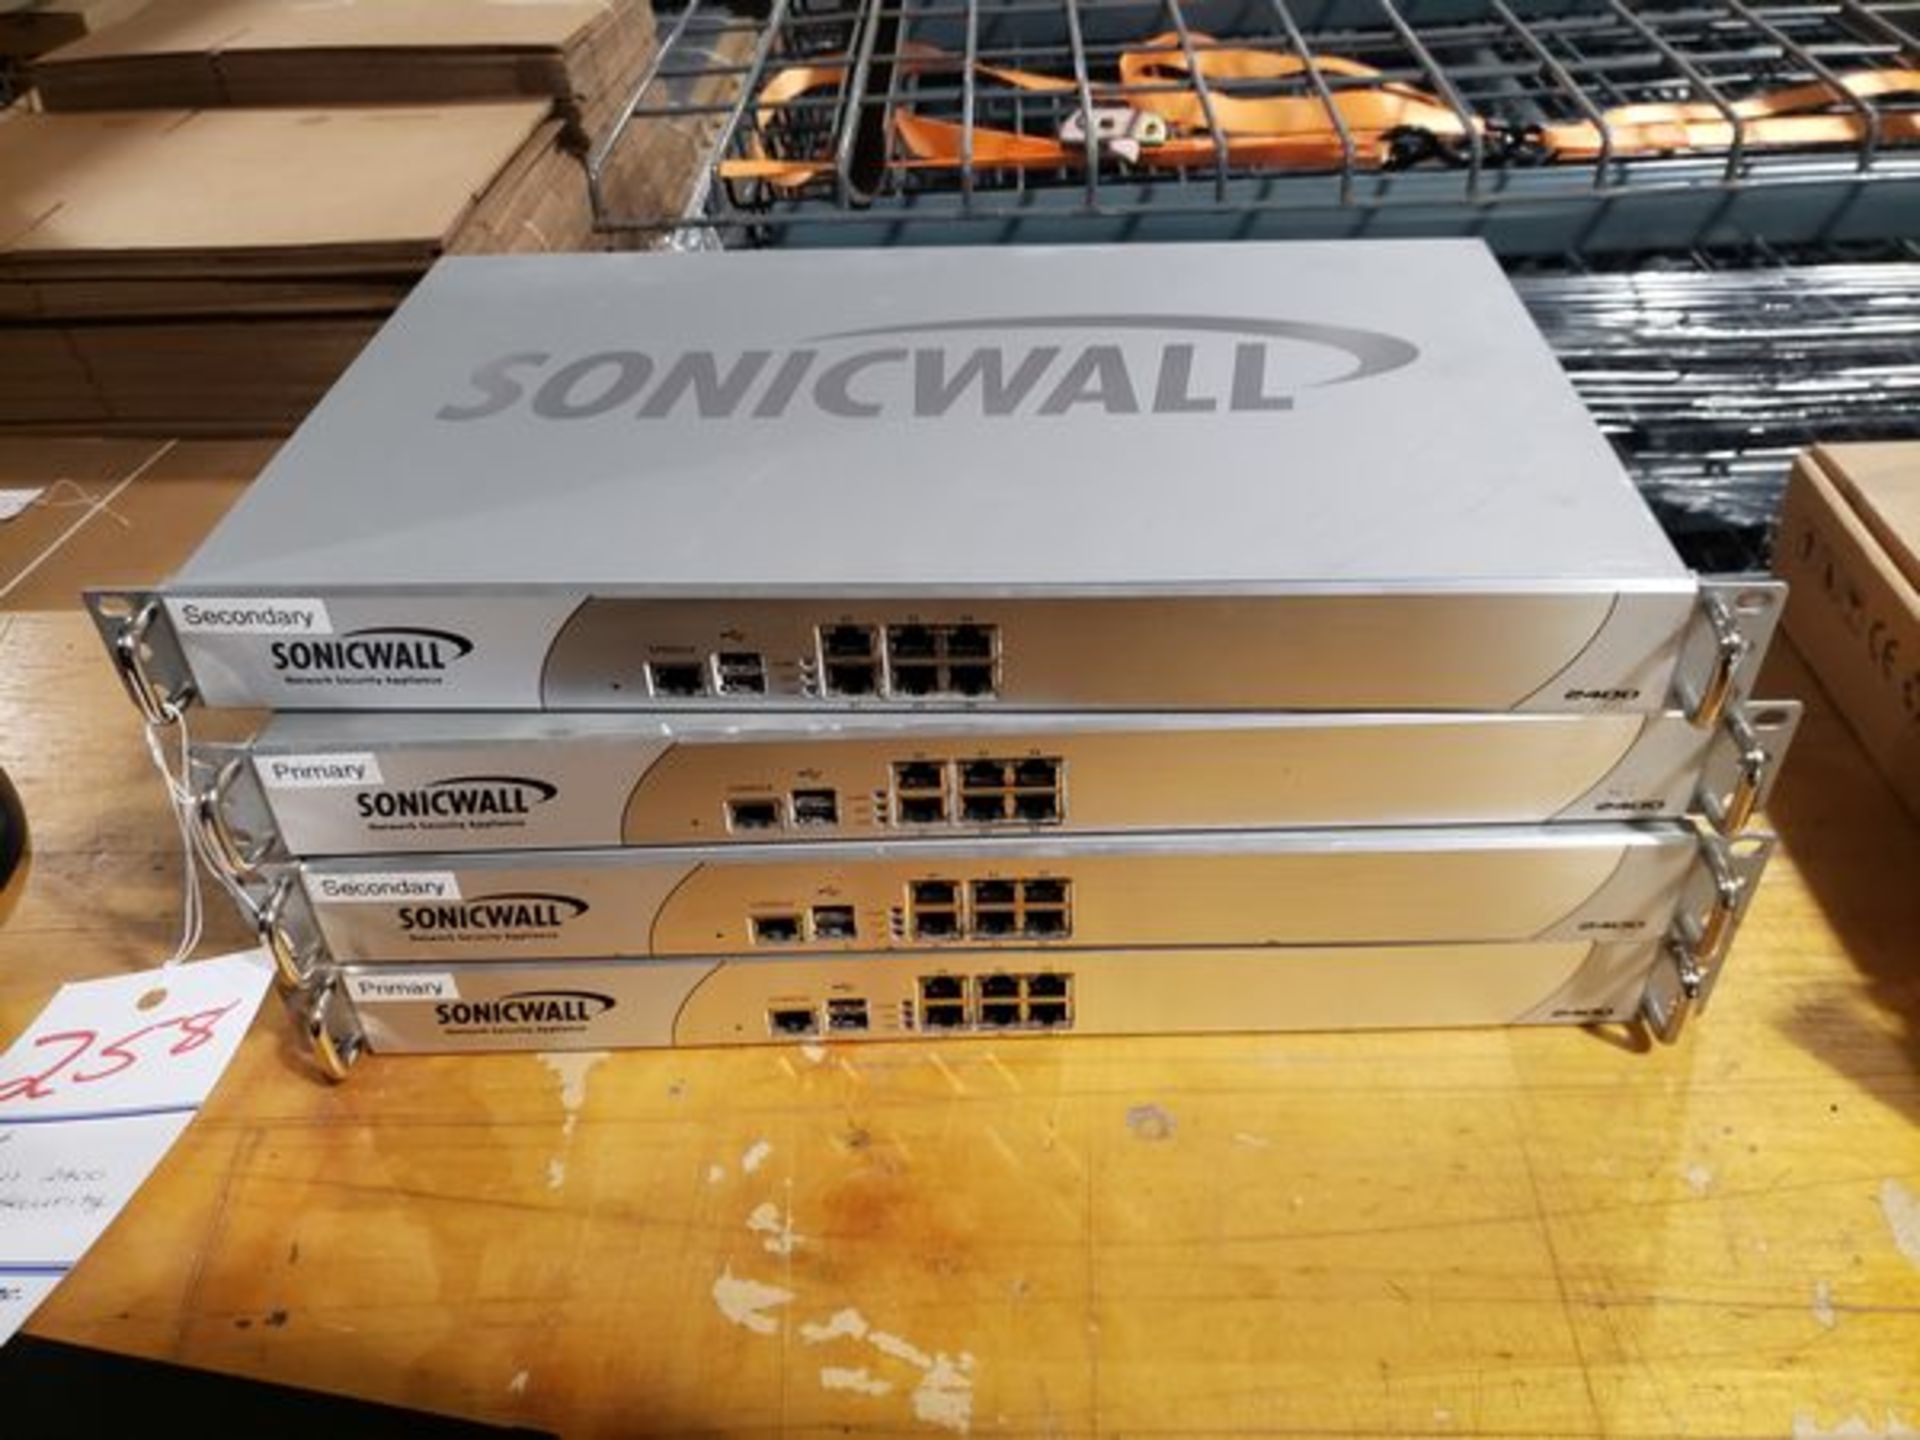 SONIC WALL 2400 NETWORK SECURITY APPLIANCE